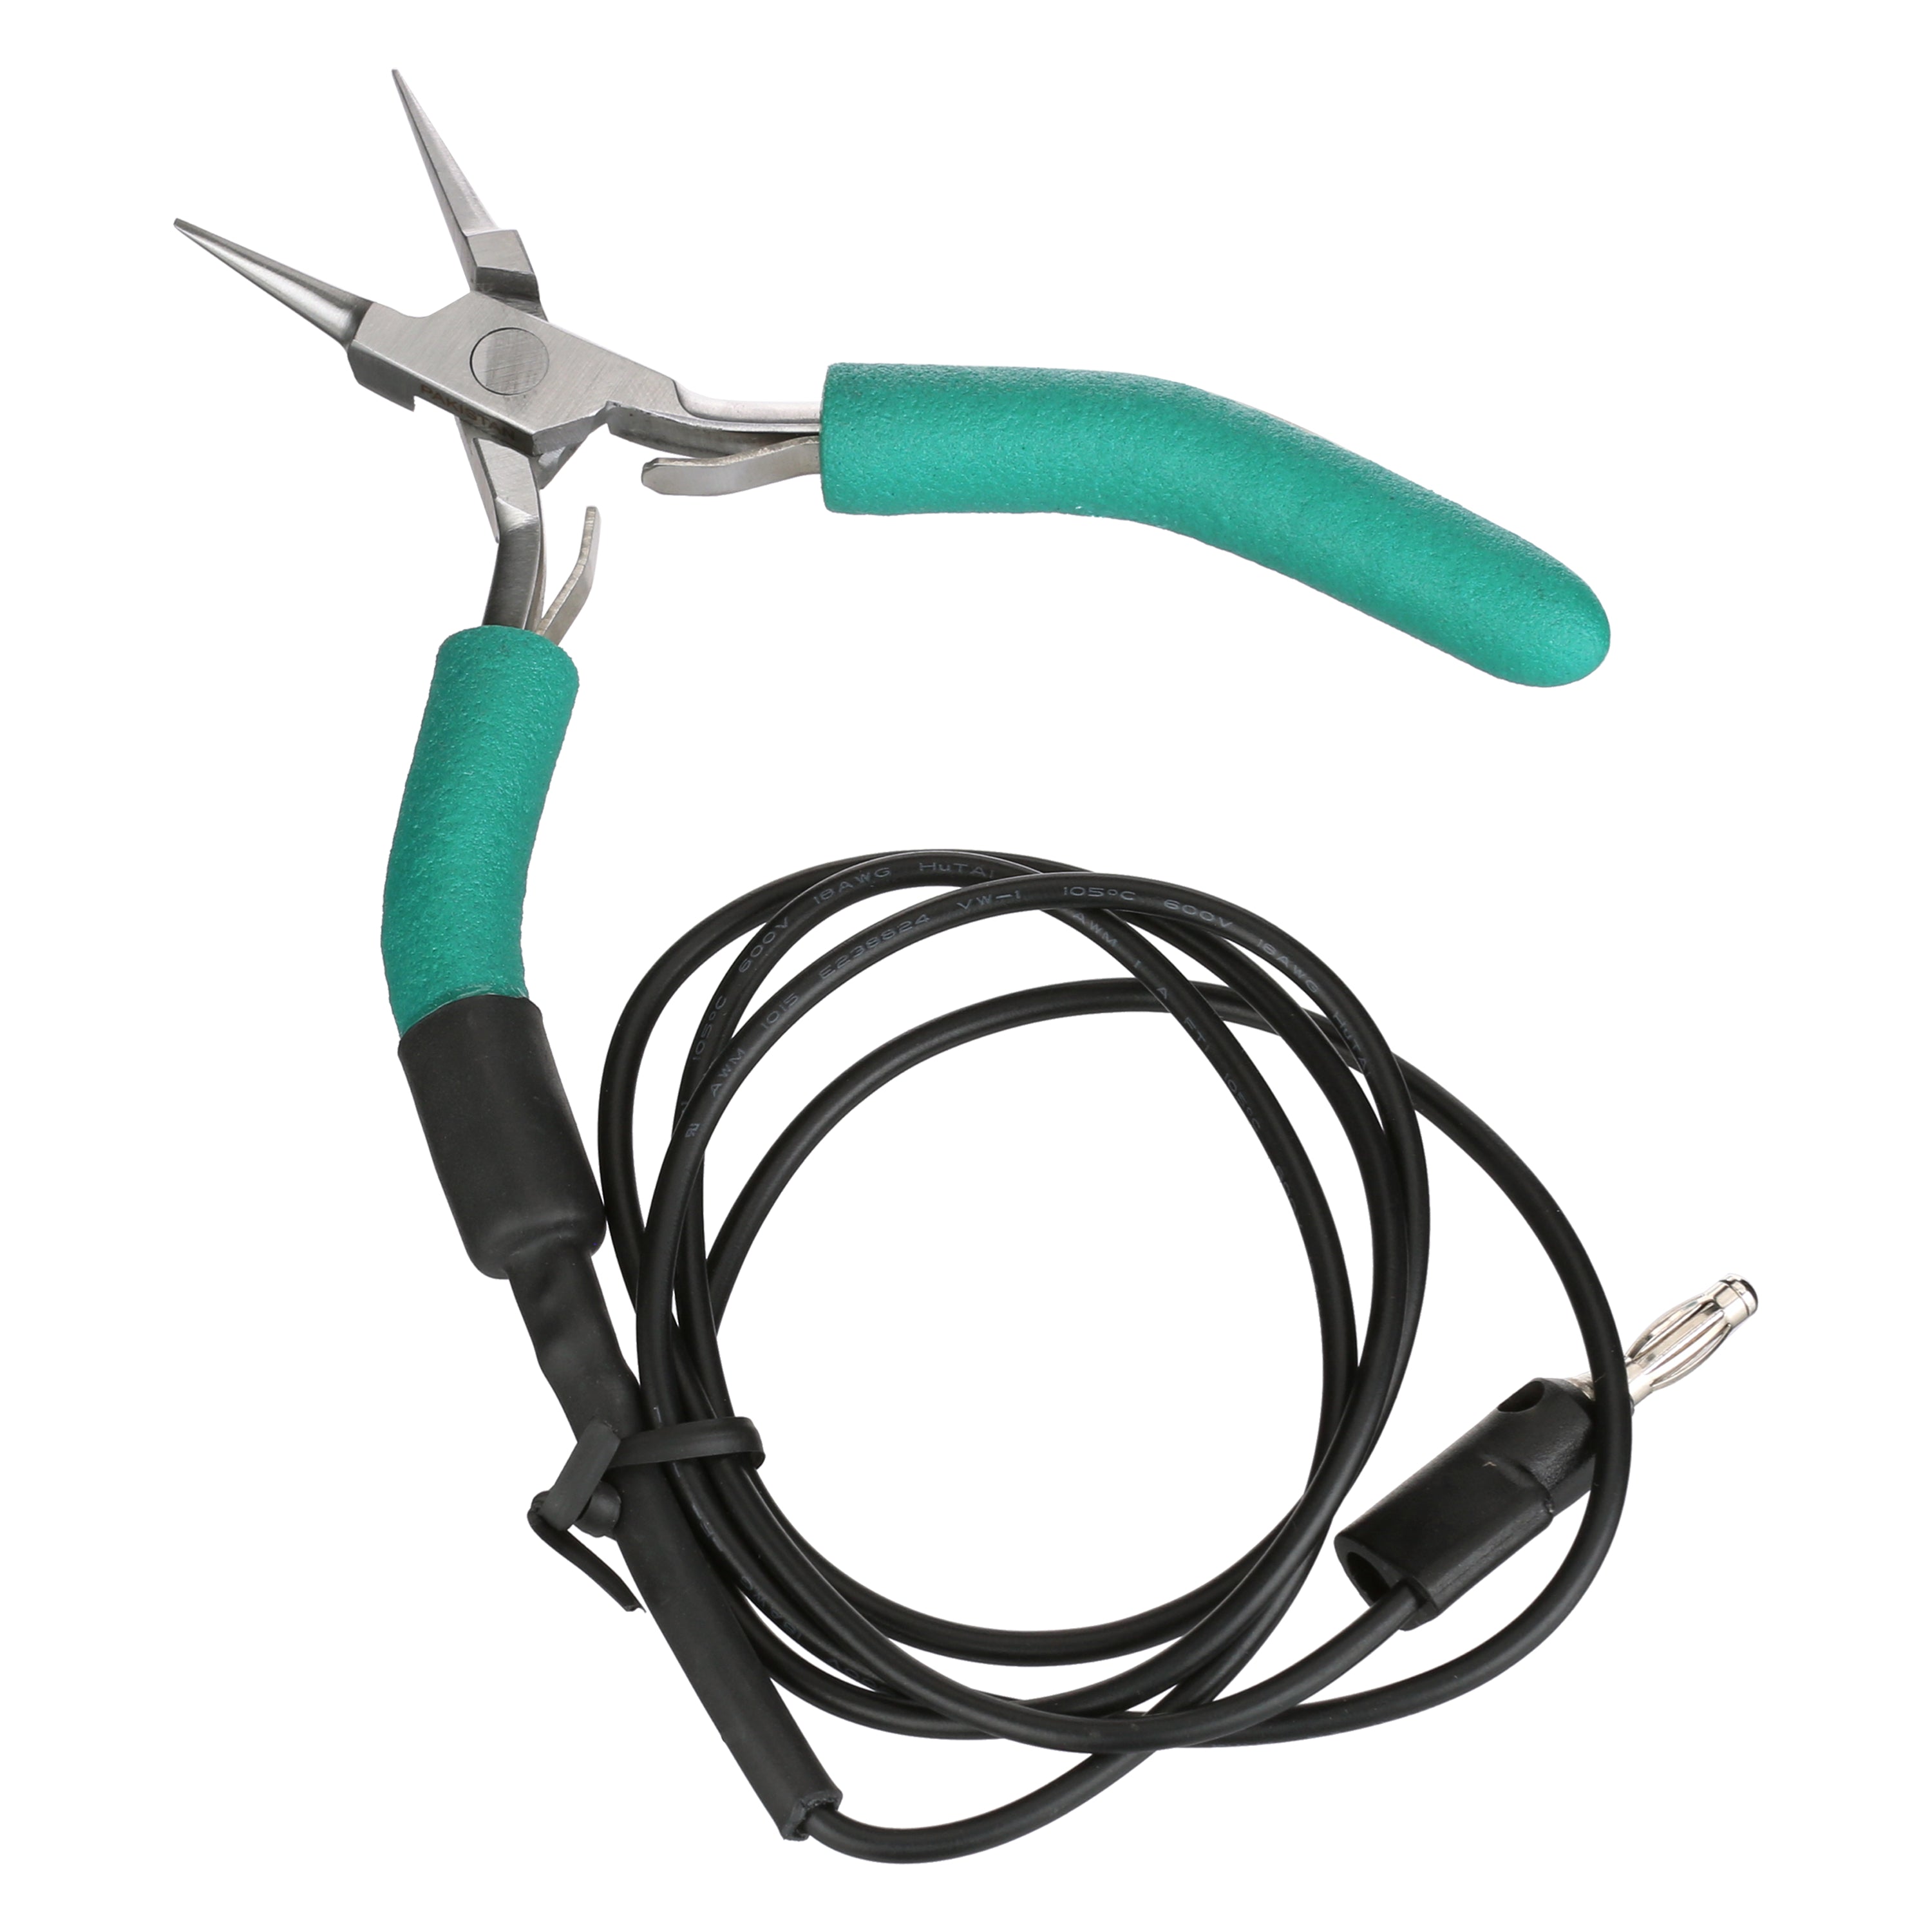 Grounded Bent Nose Pliers for Permanent Jewelry